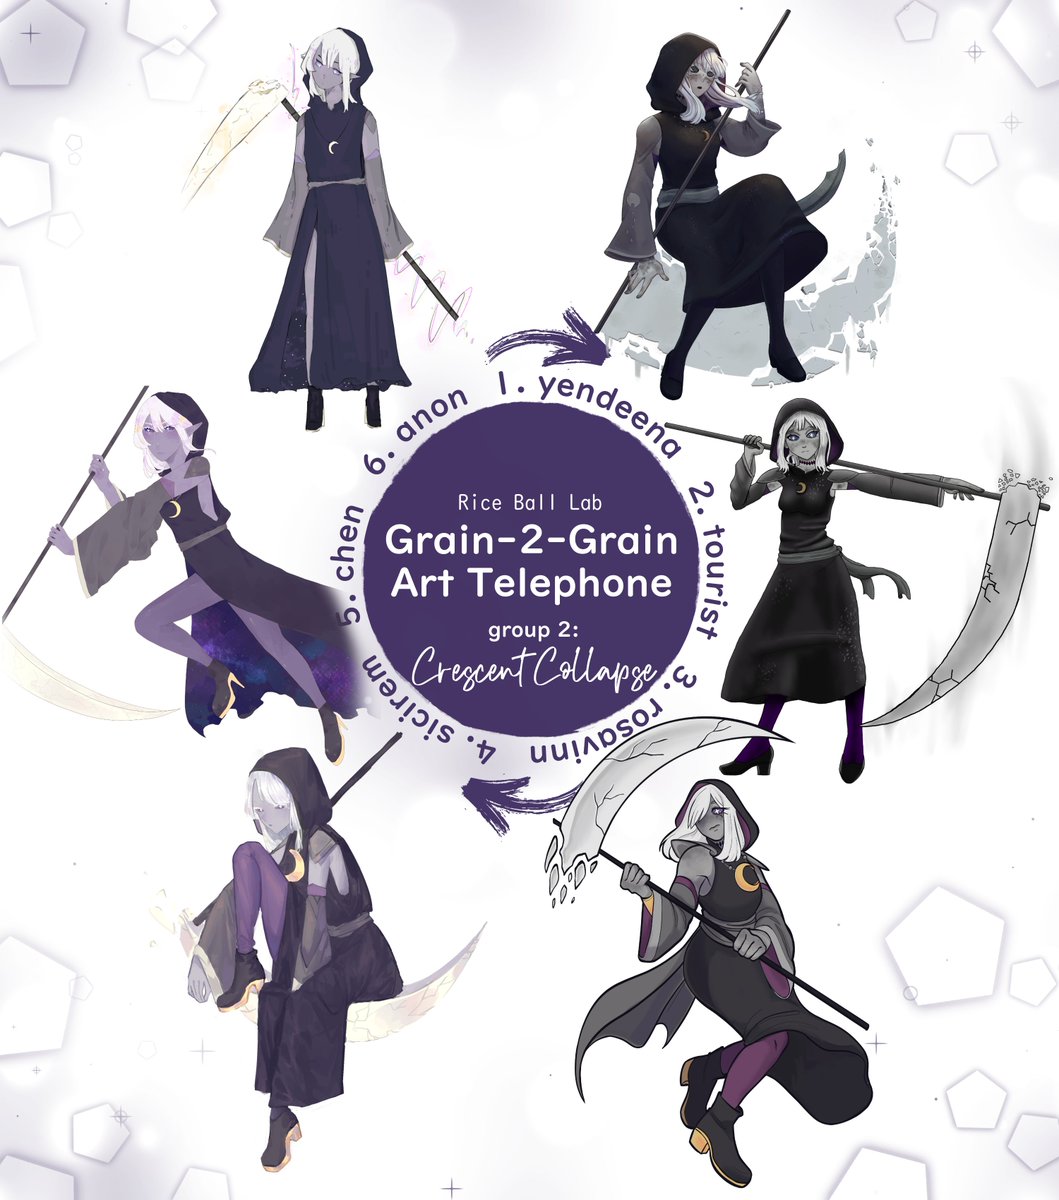 another round of art telephone with the prompt crescent collapse, hosted by @chiptzel /me:
artists:
@yendeena @WeekendWendigo @grimsleal @sicirem1 @_pkuchen and anon 